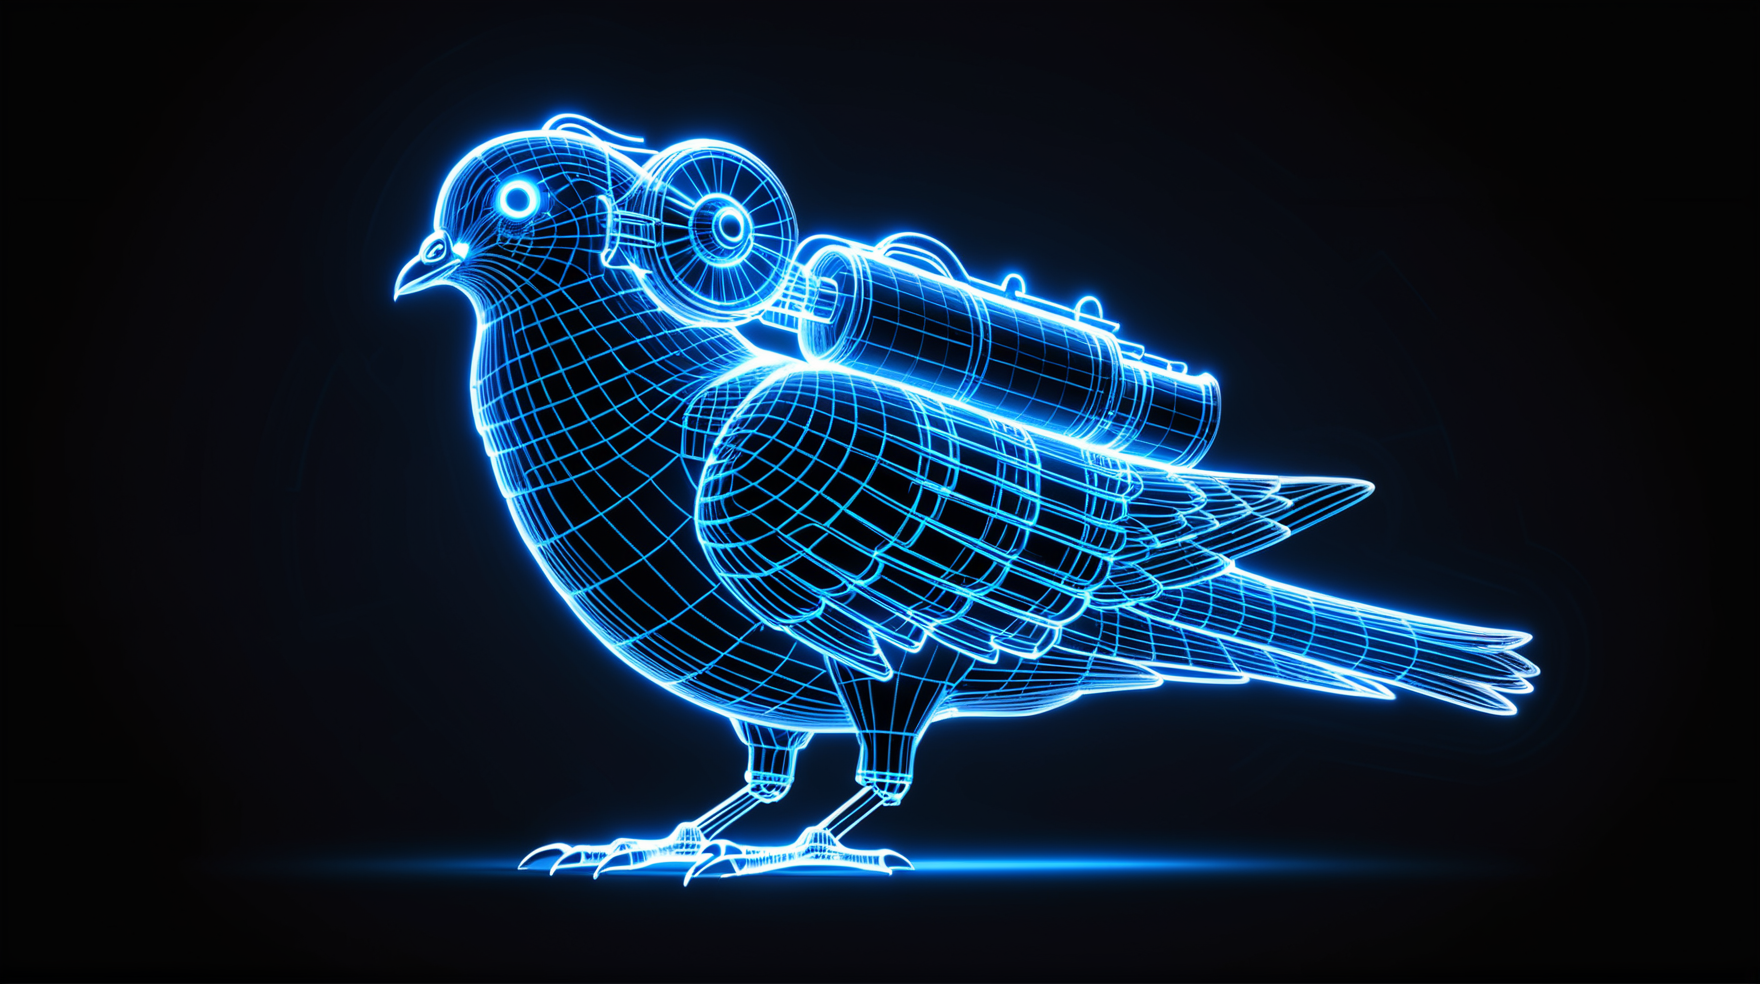 Glowing wireframe bird with mechanical wings and a camera on its back, positioned against a stark black backdrop.